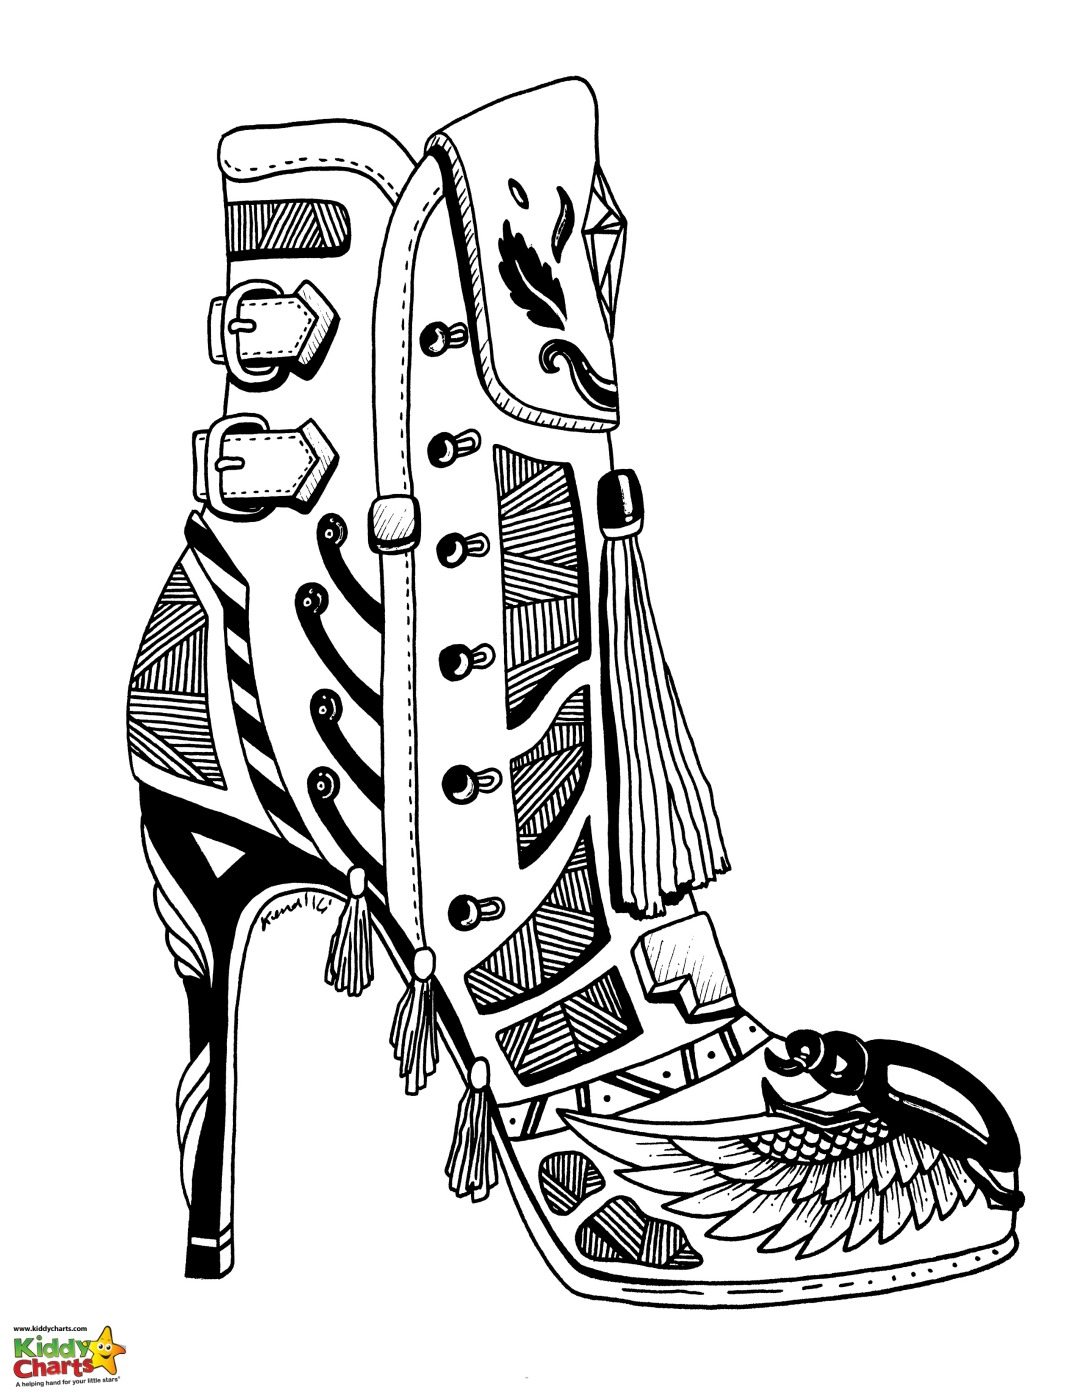 High heel shoe adult coloring page - a lovely 70s style!